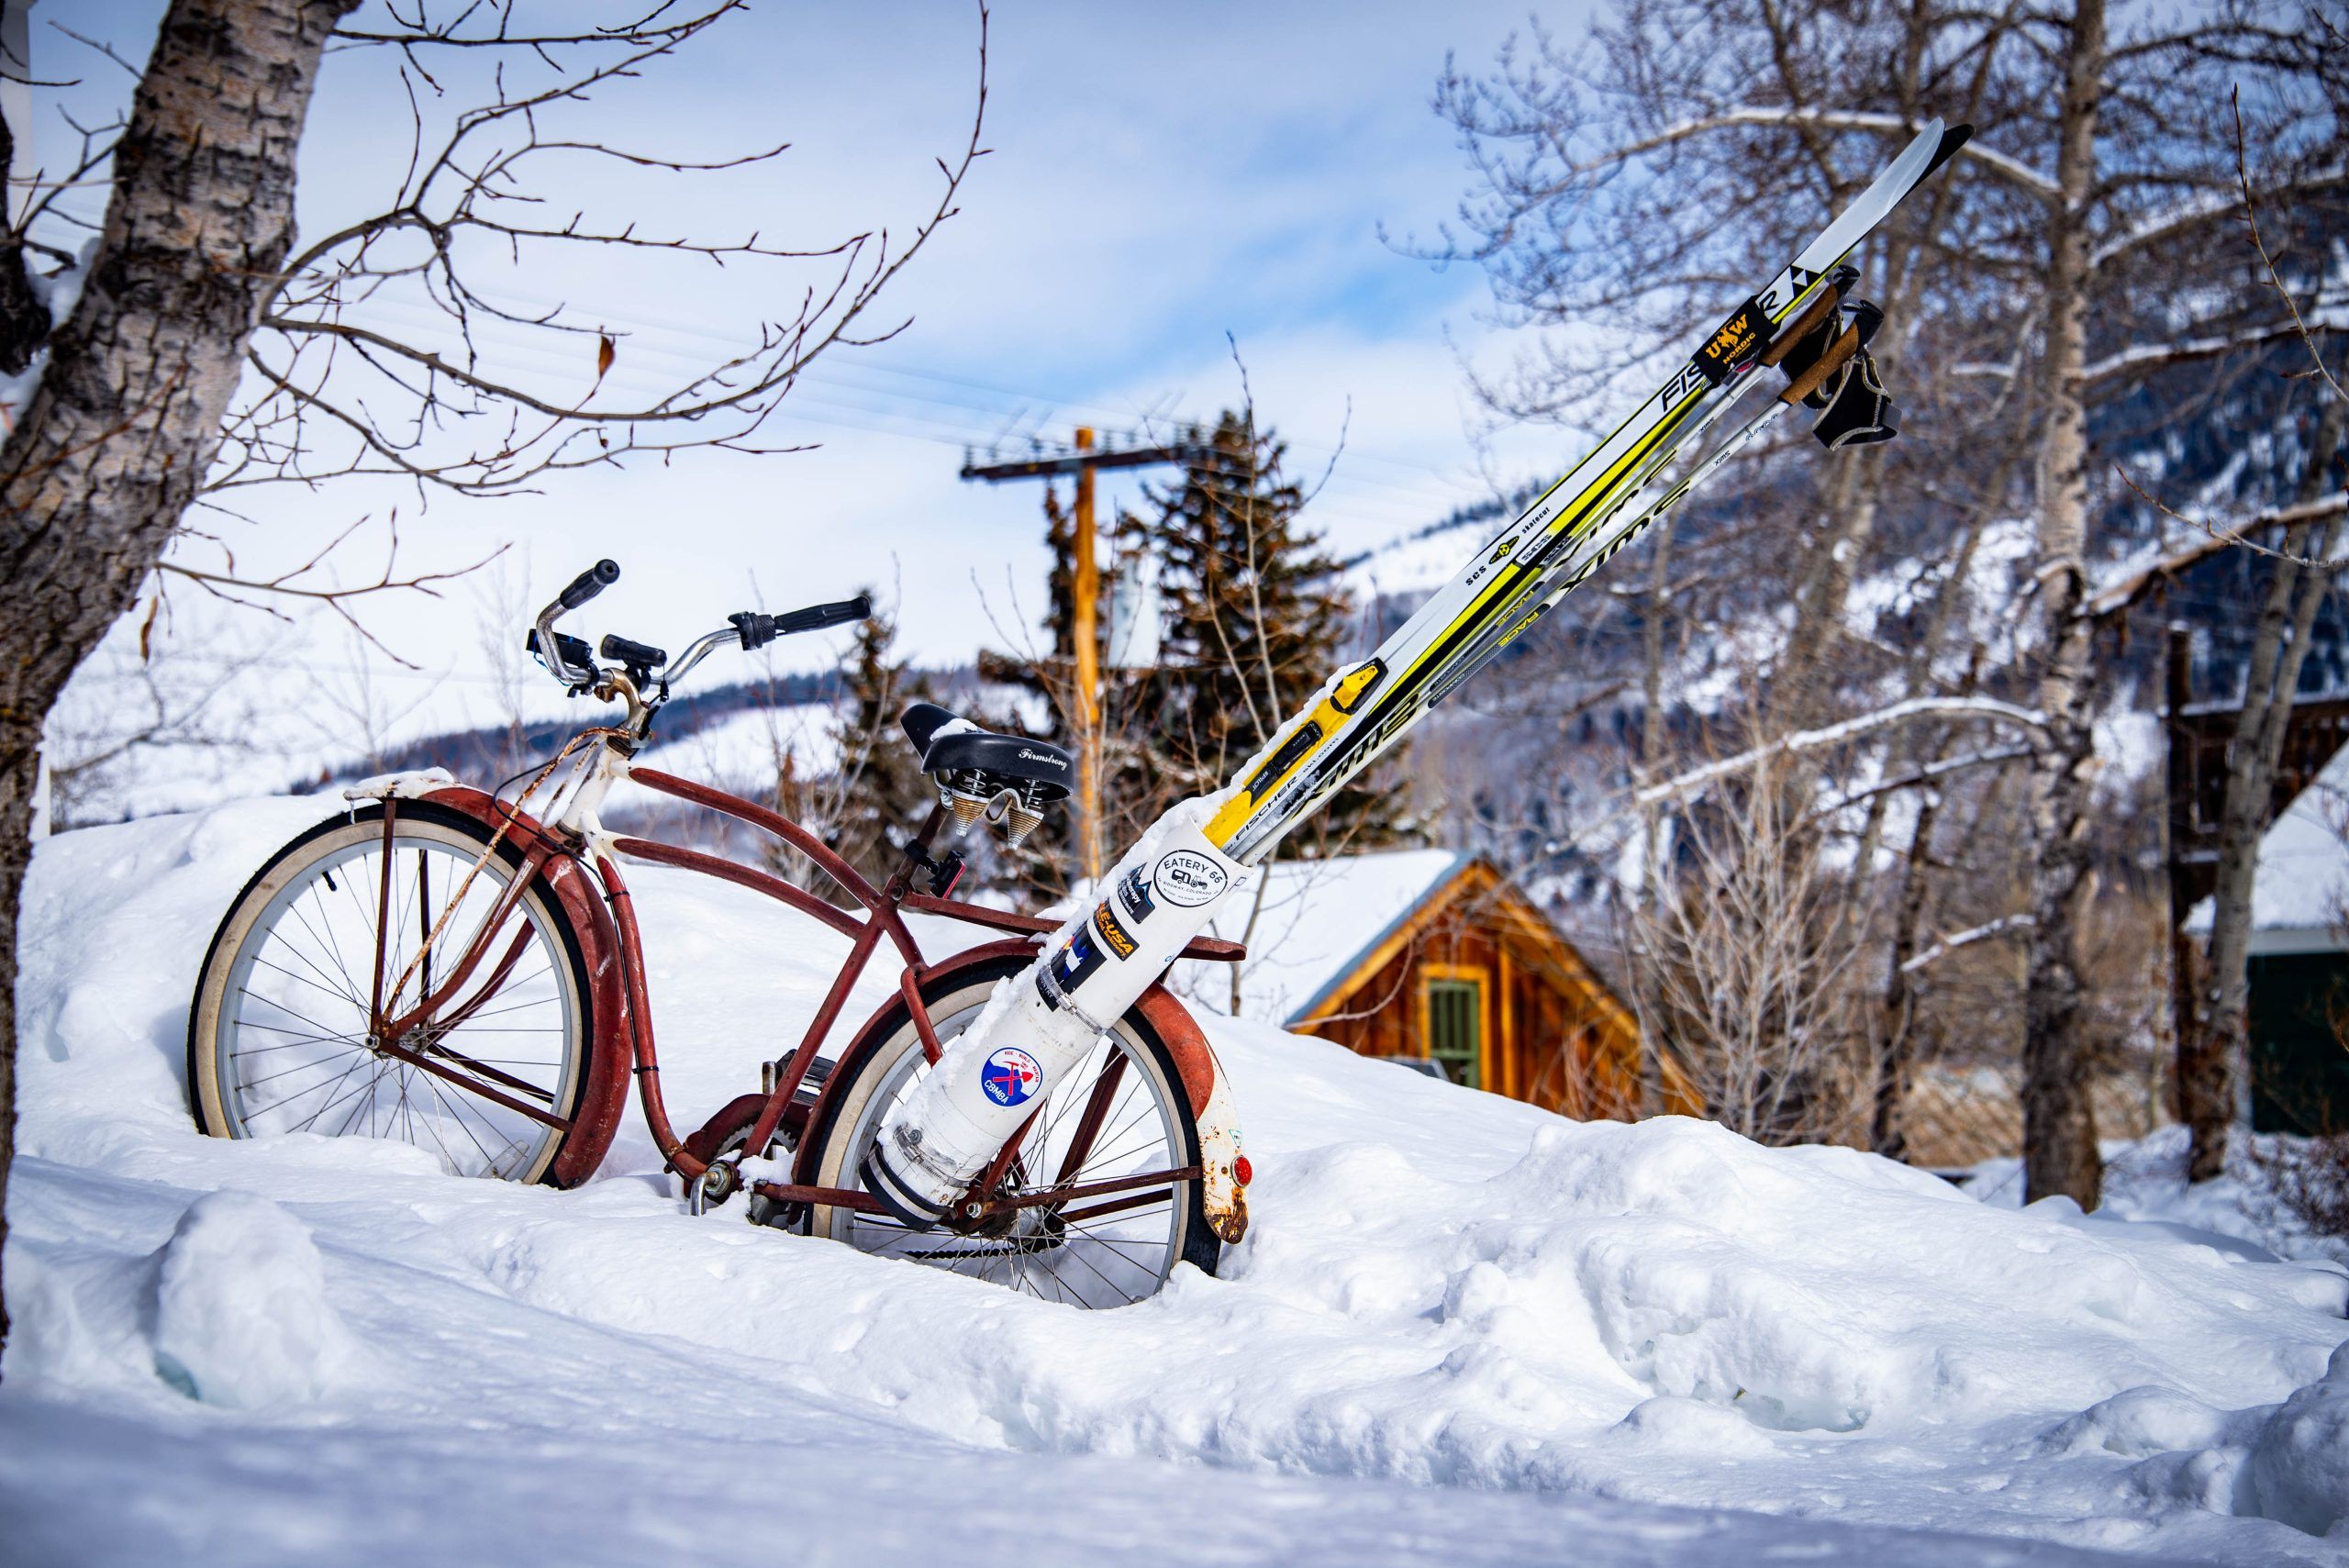 A townie bike carrying cross-country skis is stuck in a snowdrift.